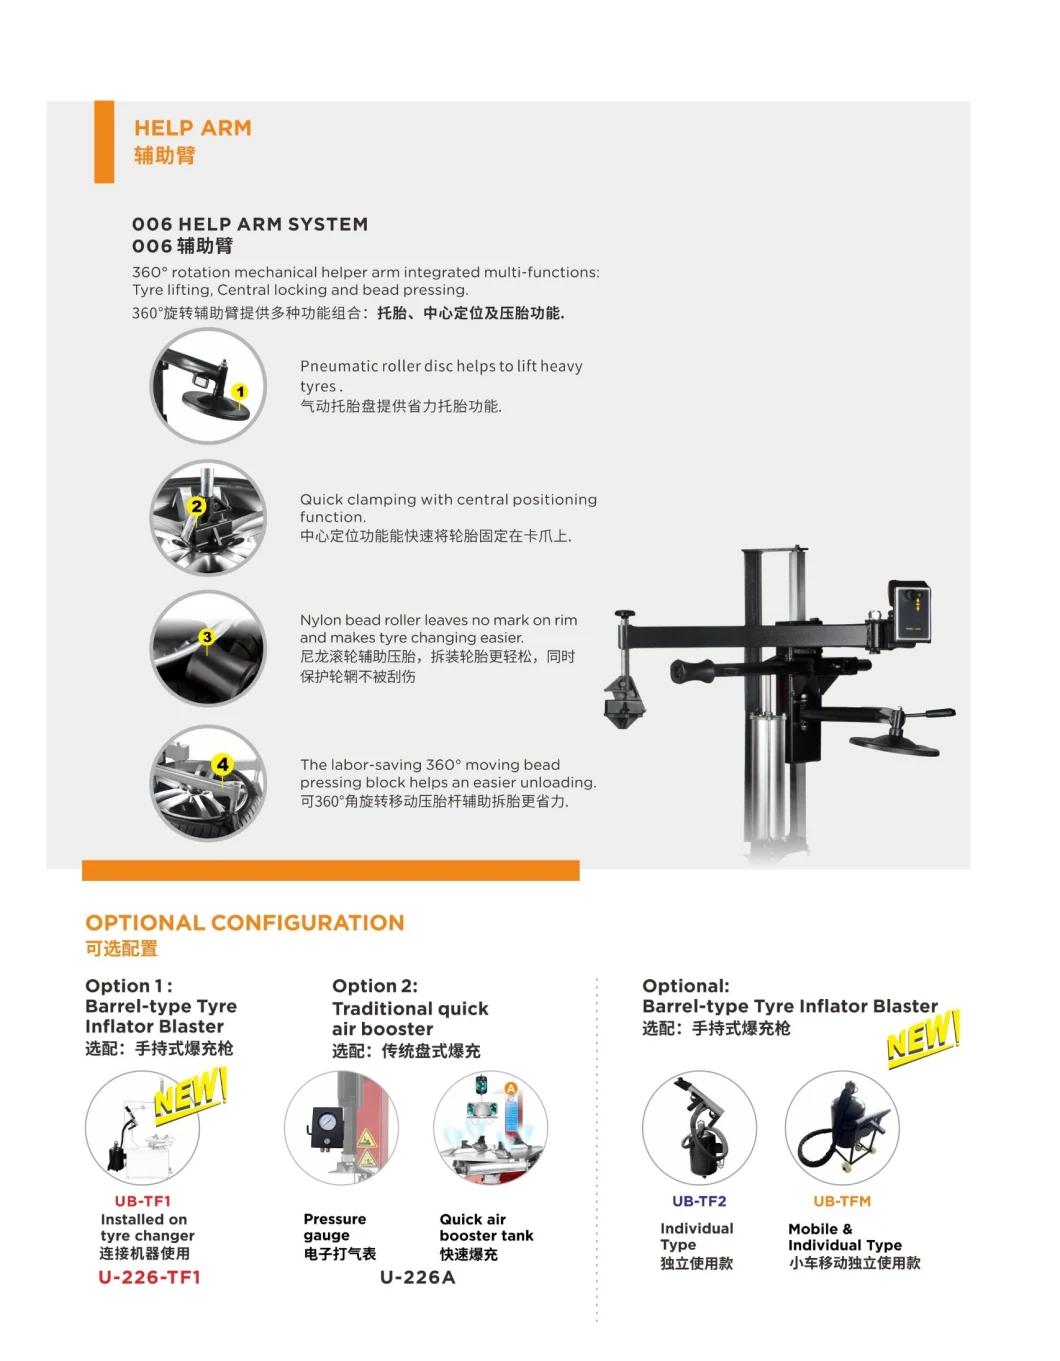 Fully-Automatic U-226 Tilting Tire Changer with Dual Assist Arm tyre Changing Machine